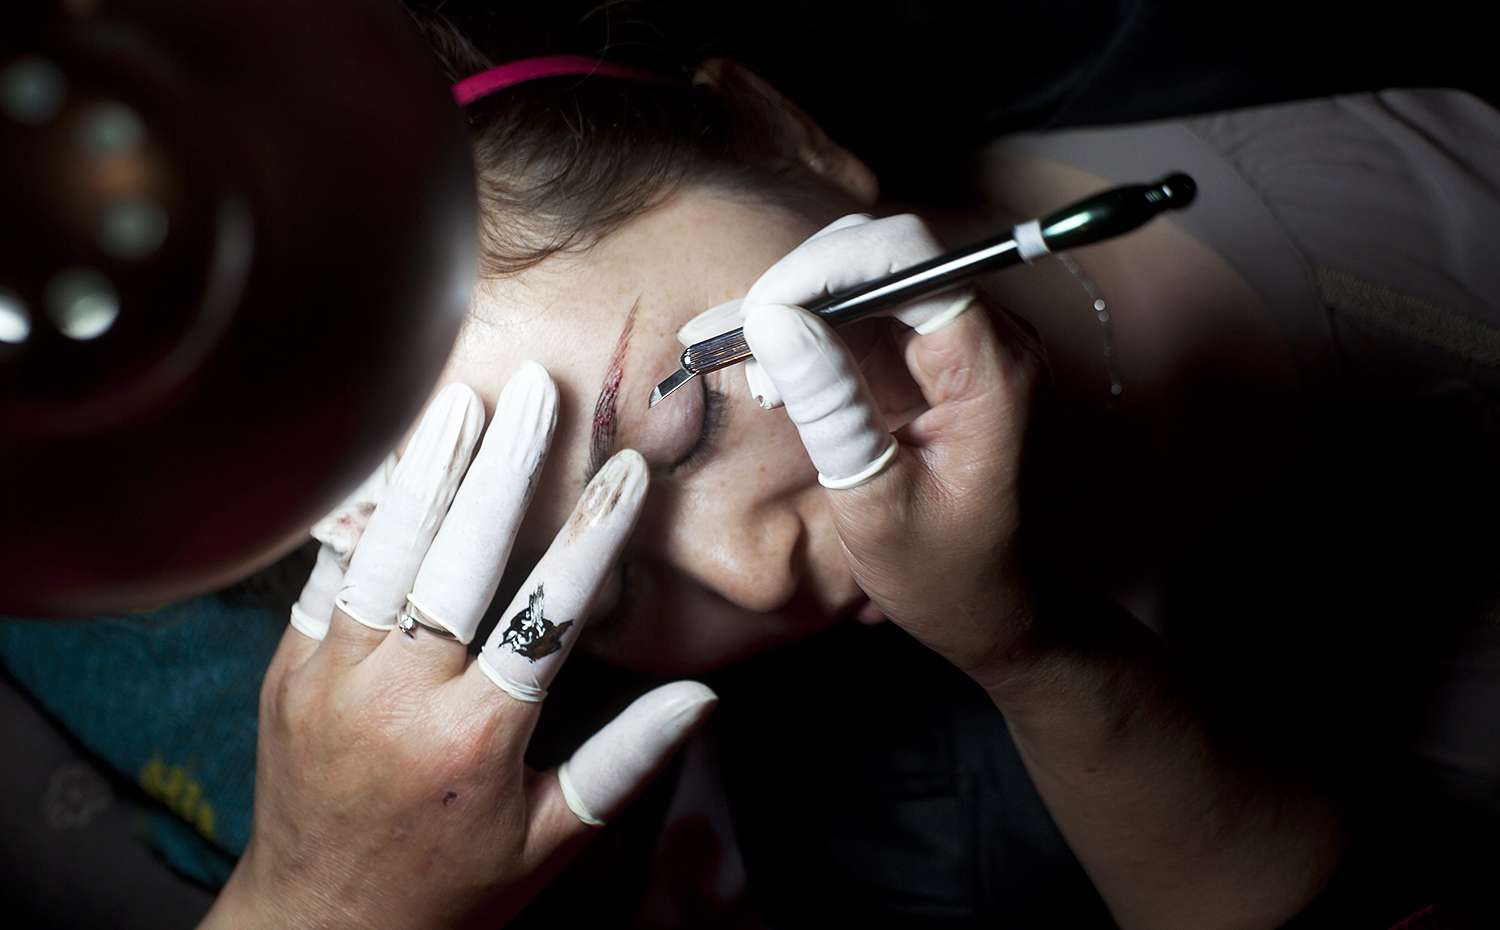 A woman has her eyebrows tattooed at a beauty, hairdressing and cosmetics expo in Beijing. Photo: EPA